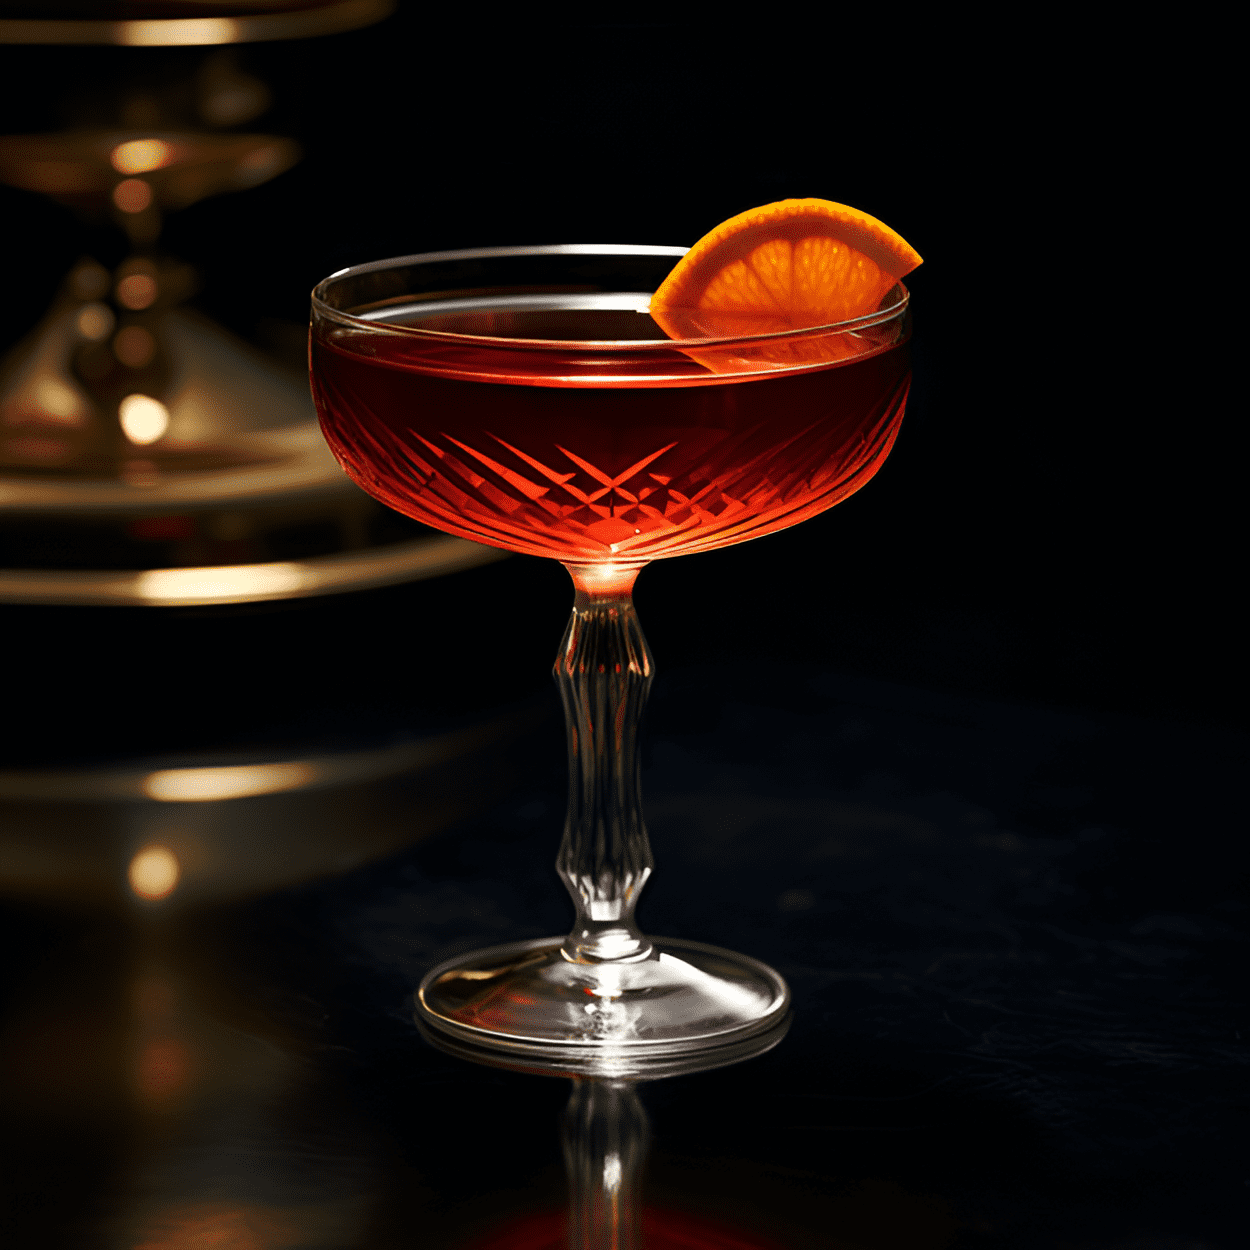 Ironman Cocktail Recipe - The Ironman Cocktail is a robust, full-bodied drink with a sweet and tangy flavor. The whiskey provides a strong, smoky base, while the cranberry juice adds a tart, fruity note. The addition of orange liqueur gives it a sweet, citrusy edge.